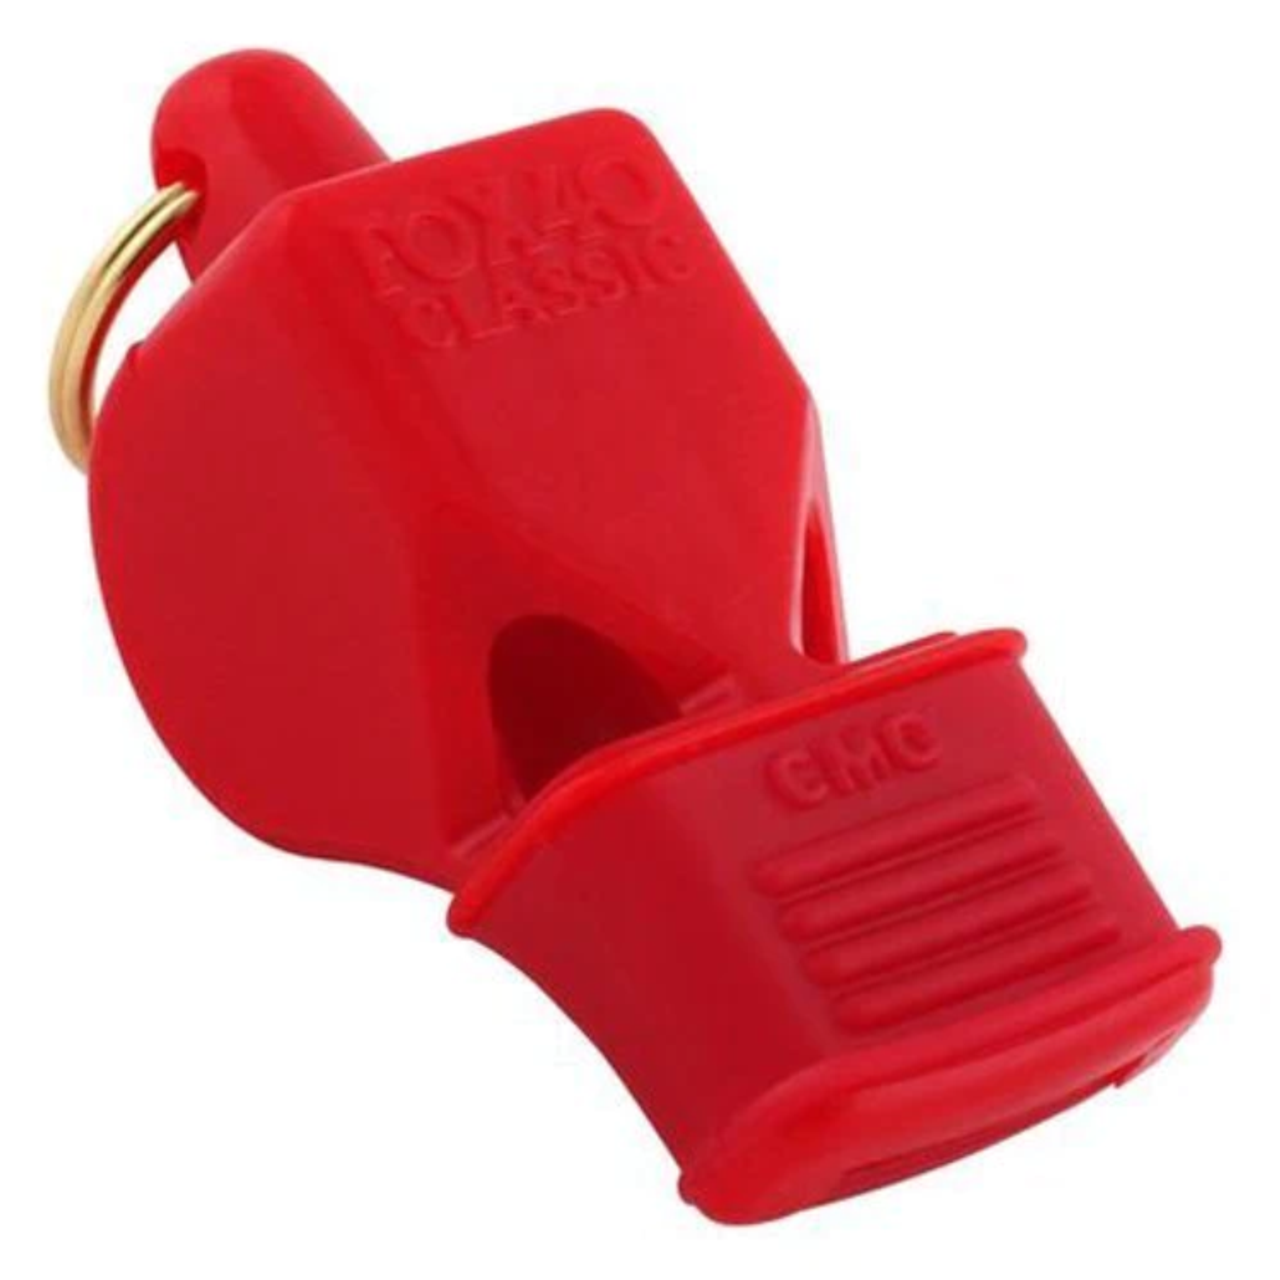 Fox 40 Classic CMG Whistle, Red